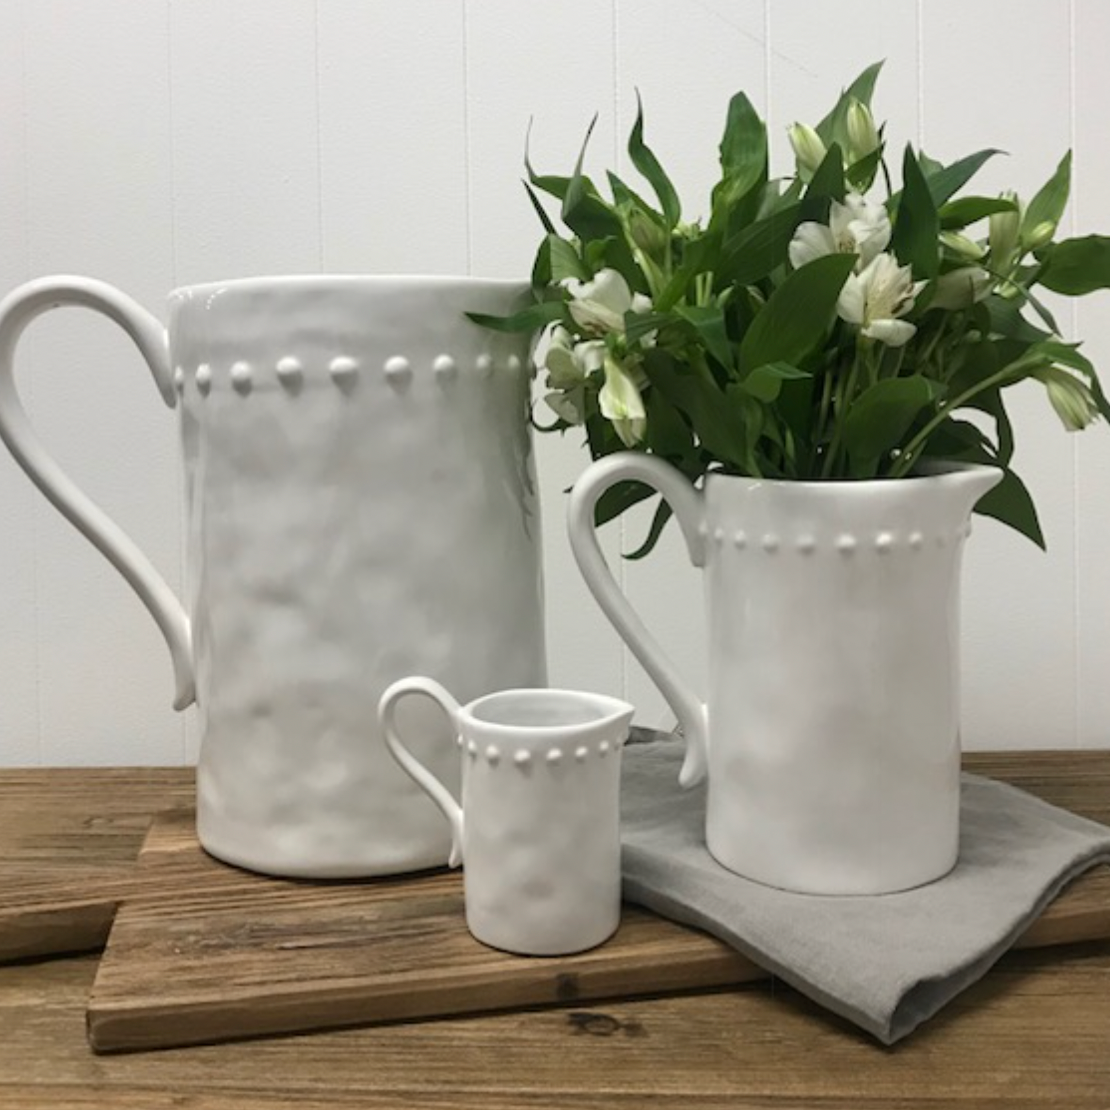 Jug with Dots - White LARGE - Daisy Grace Lifestyle